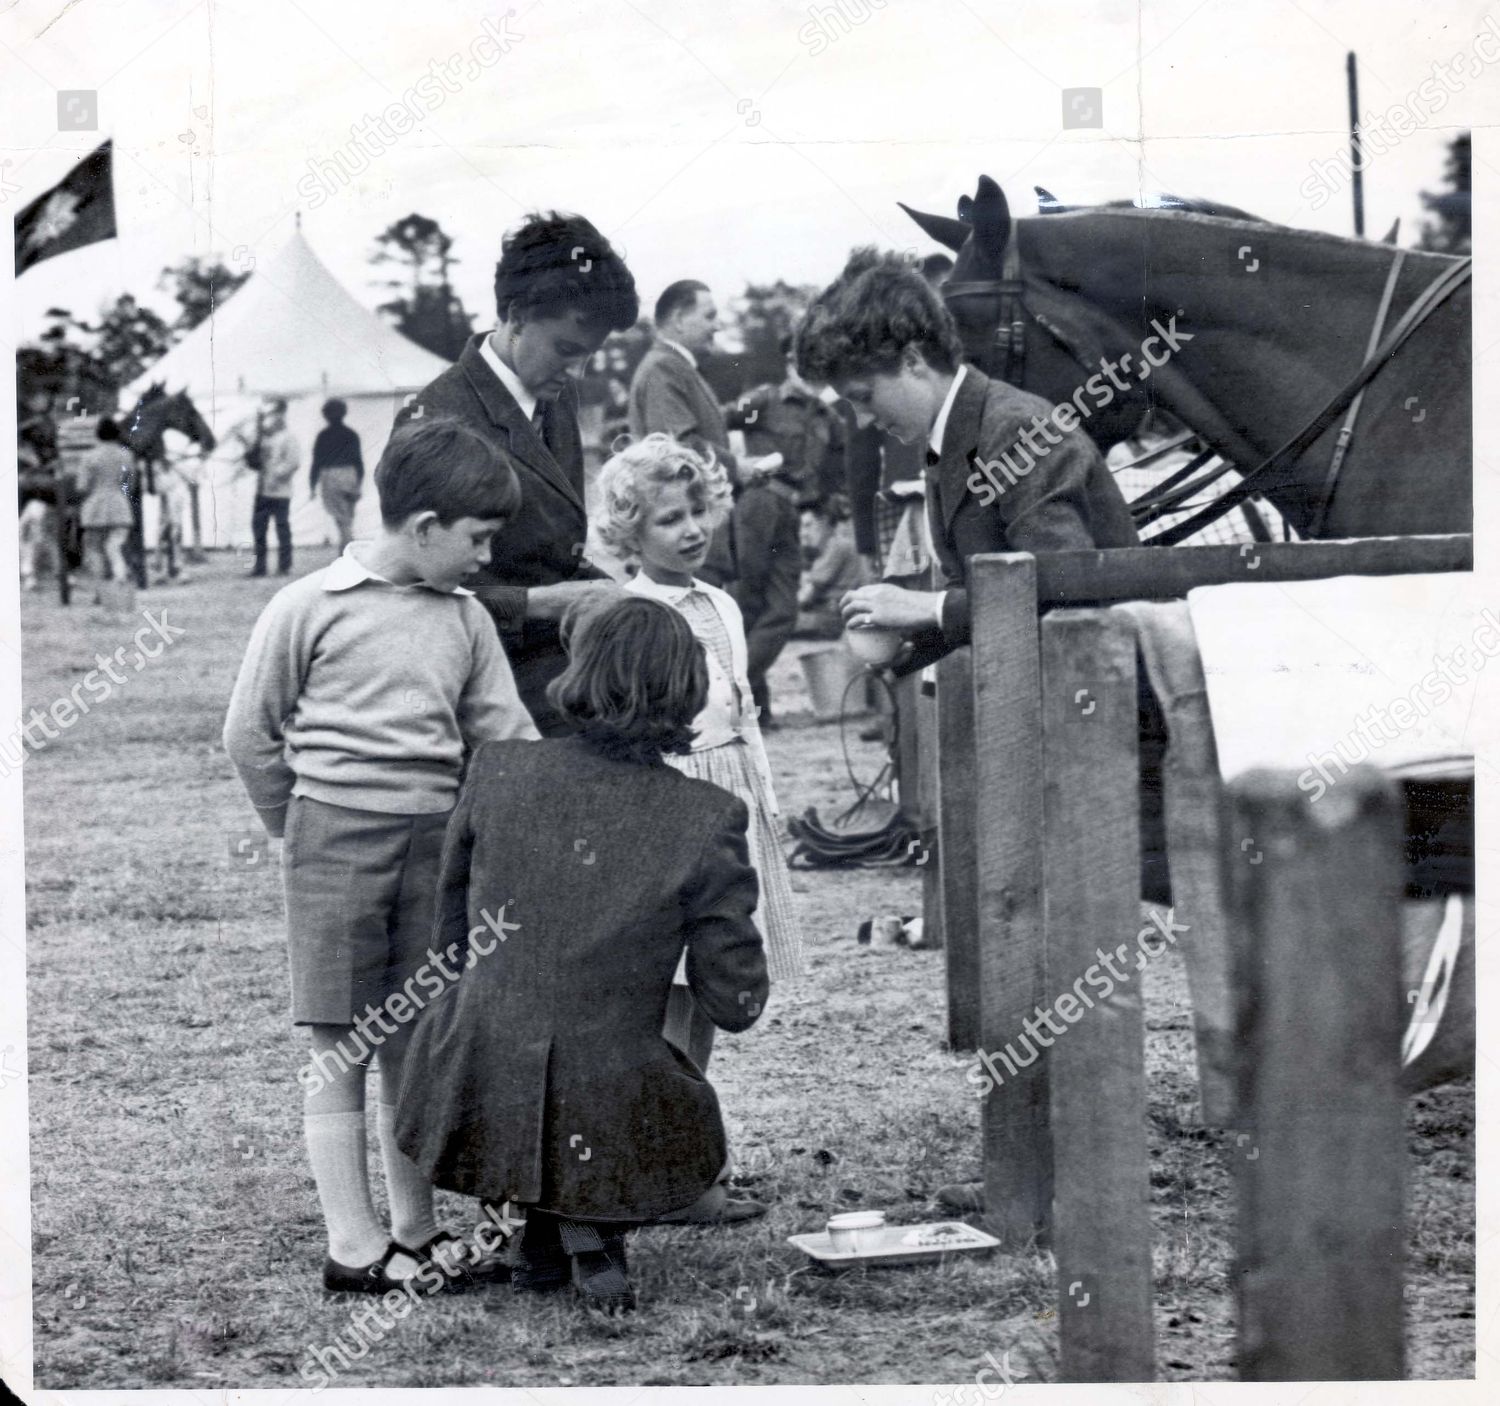 the-prince-of-wales-9th-june1957-inquisitive-heads-in-fact-finding-harmony-prince-charles-and-princess-anne-spot-a-picnic-by-the-ponies-maybe-there-is-something-here-to-tell-father-just-back-from-germany-and-already-polo-playing-at-windsor-shutterstock-editorial-886827a.jpg